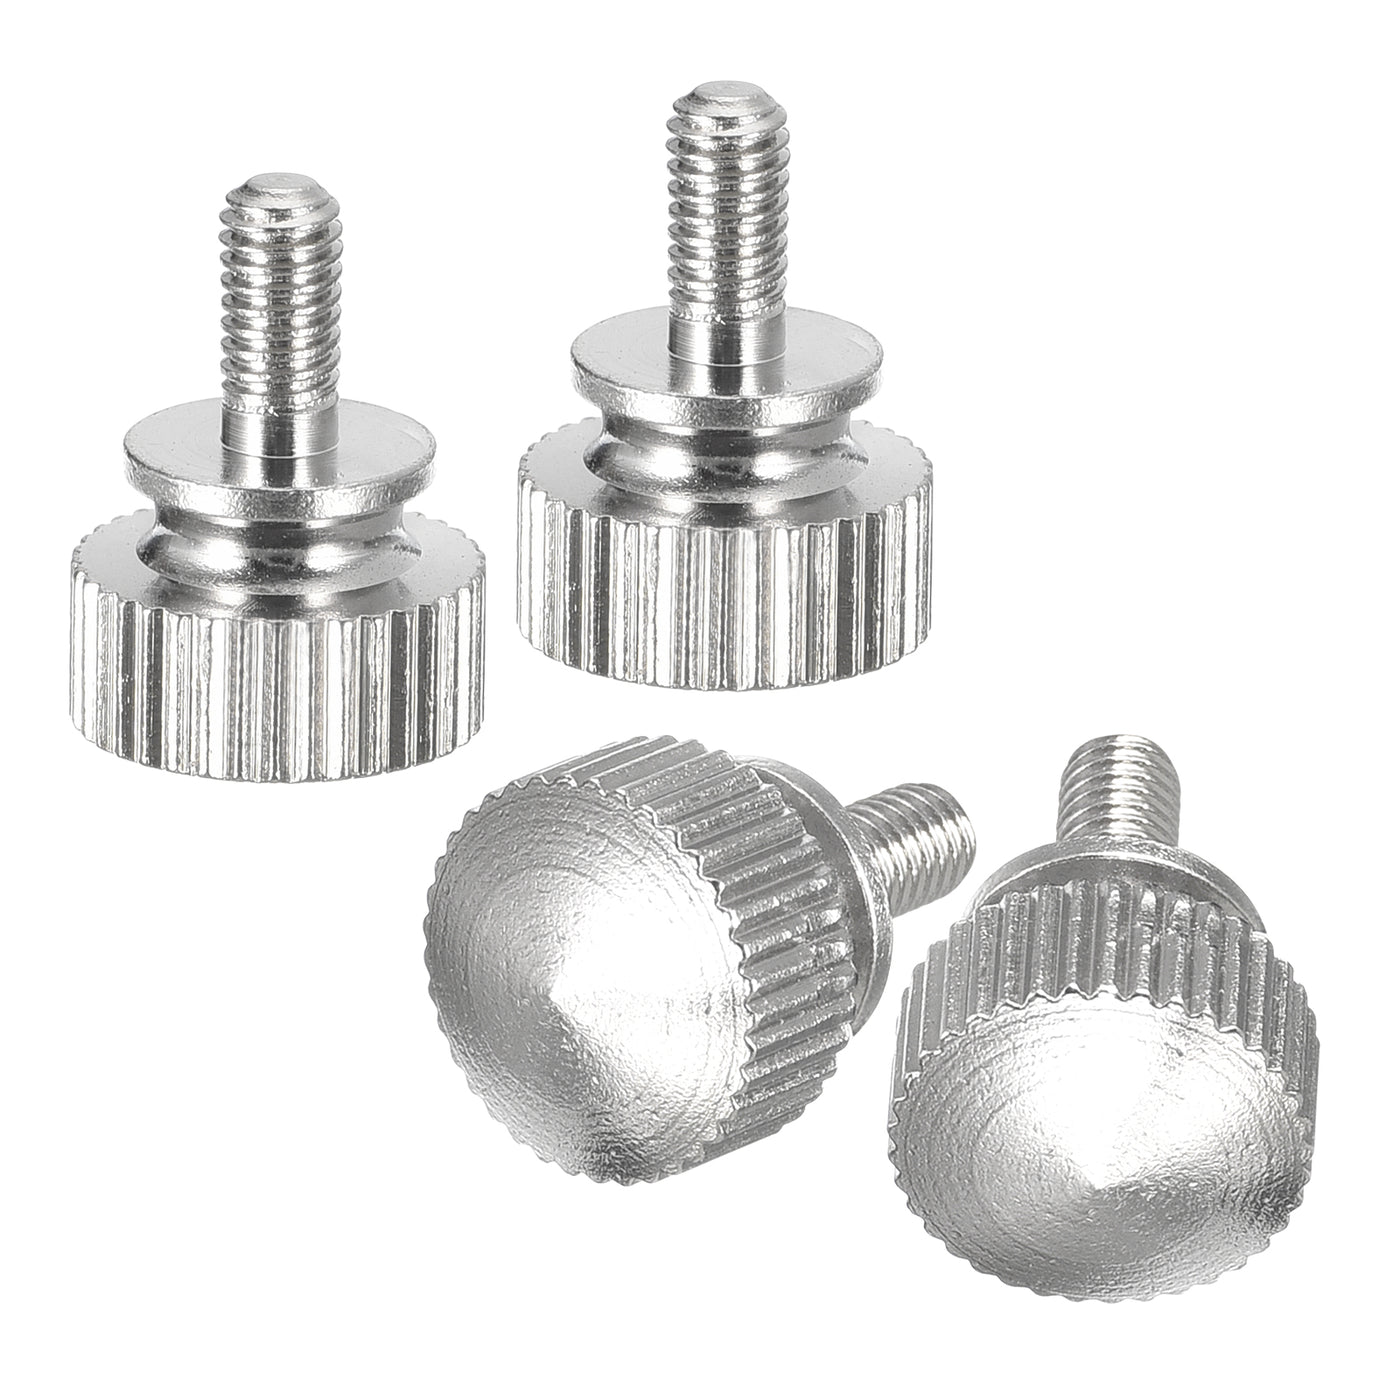 uxcell Uxcell M3x6mm Knurled Thumb Screws, 4pcs Brass Thumb Screws with Shoulder, Silver Tone